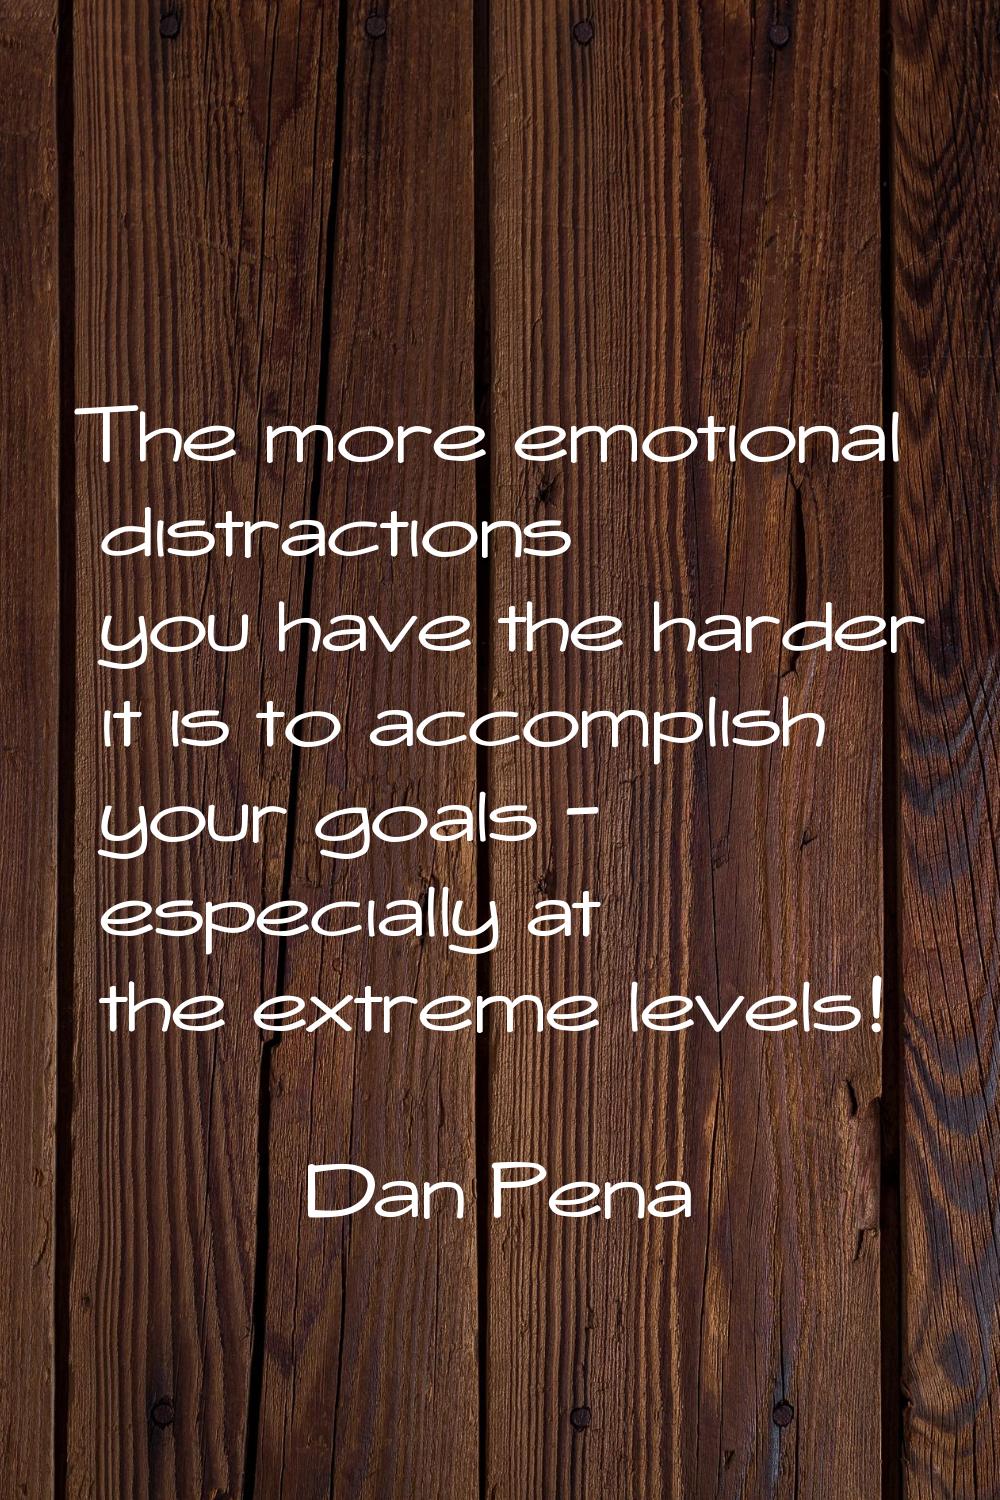 The more emotional distractions you have the harder it is to accomplish your goals - especially at 